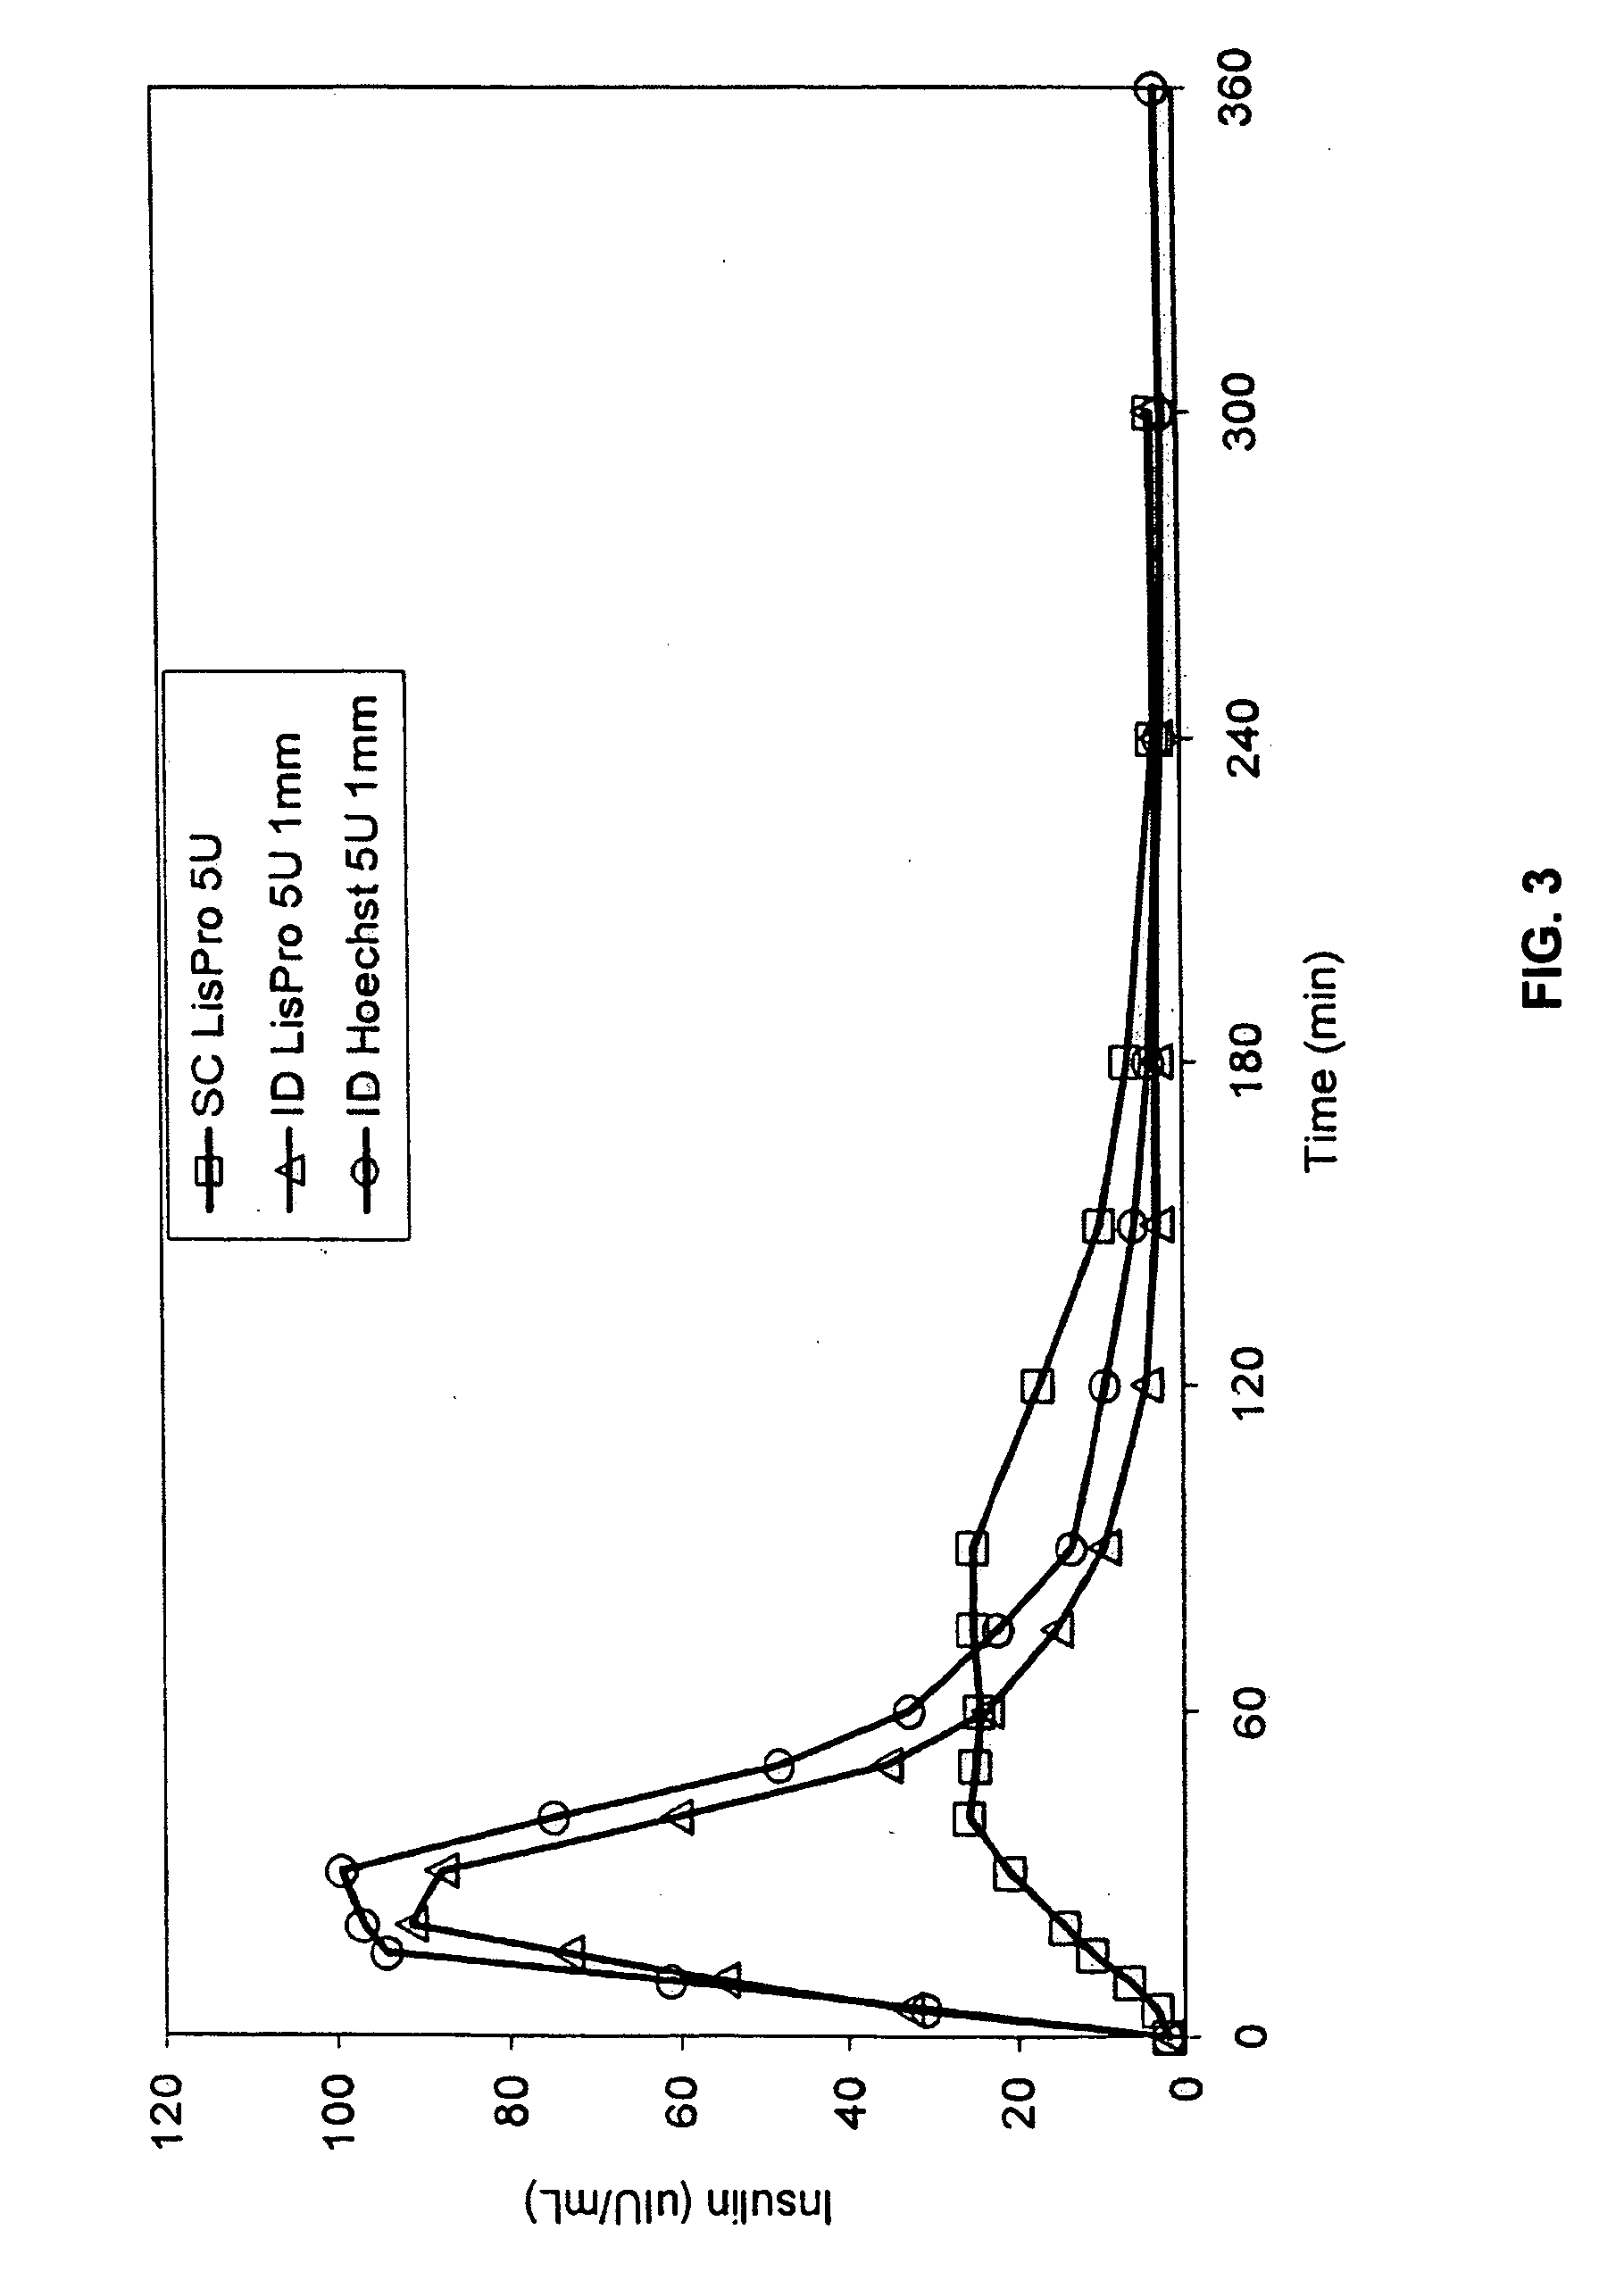 Method for delivering therapeutic proteins to the intradermal compartment